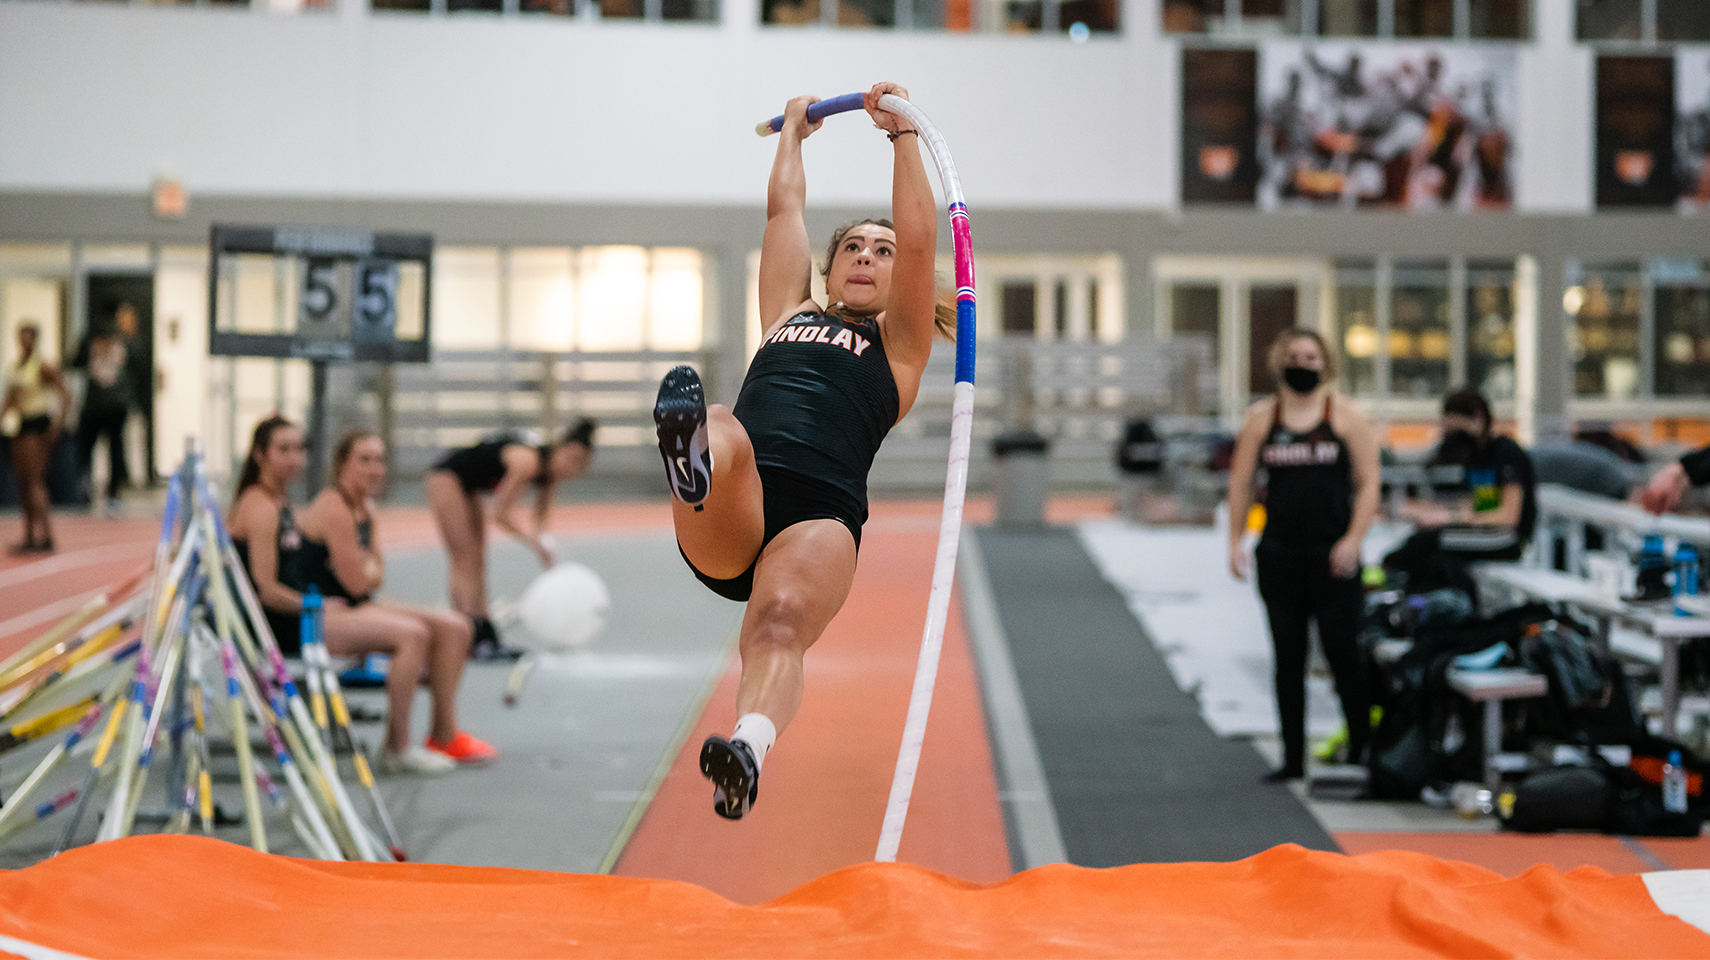 Women's pole vaulter lifting off the ground